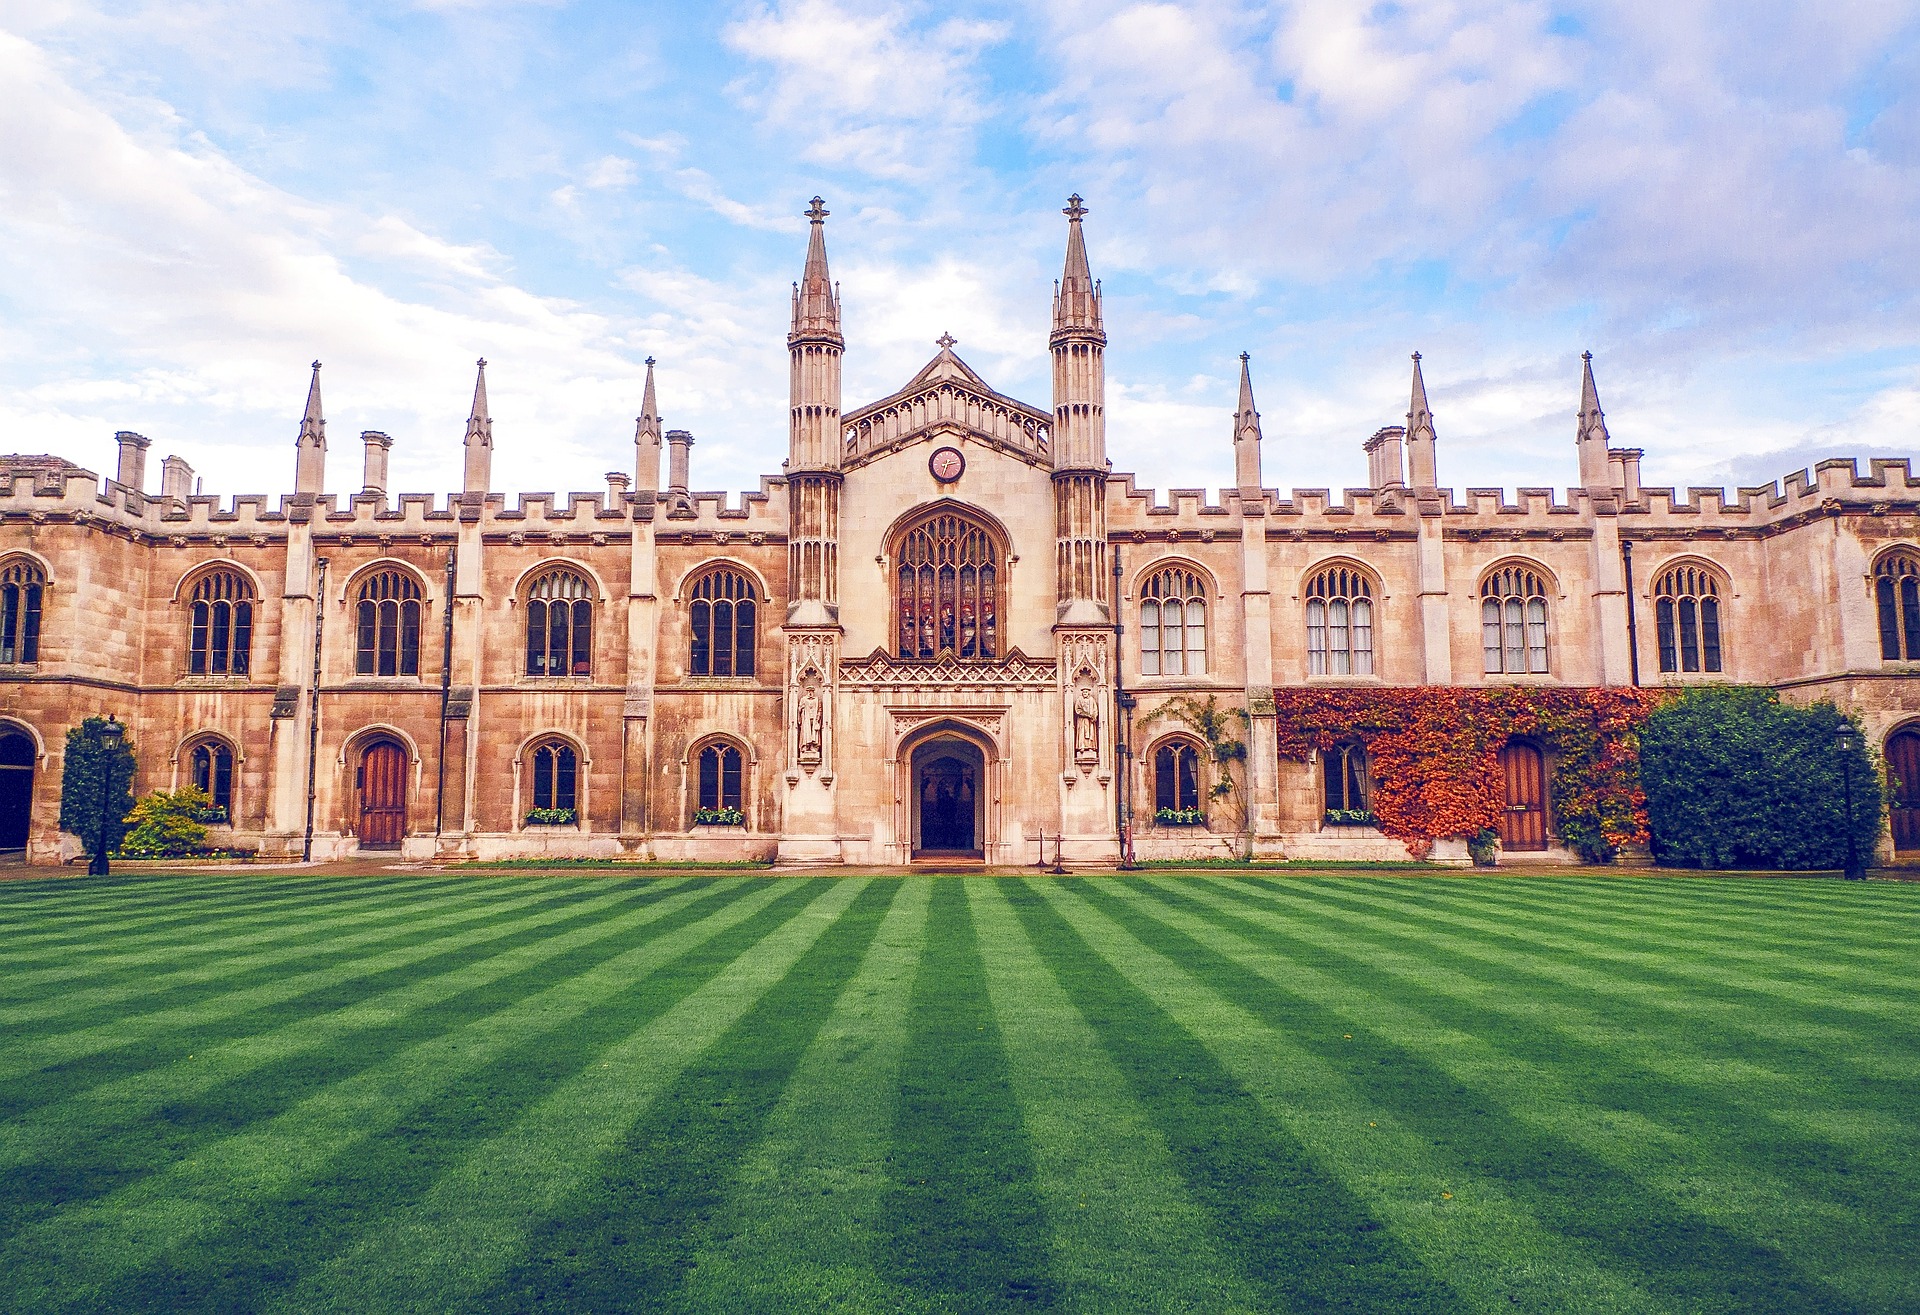 The Most Beautiful Cambridge Colleges